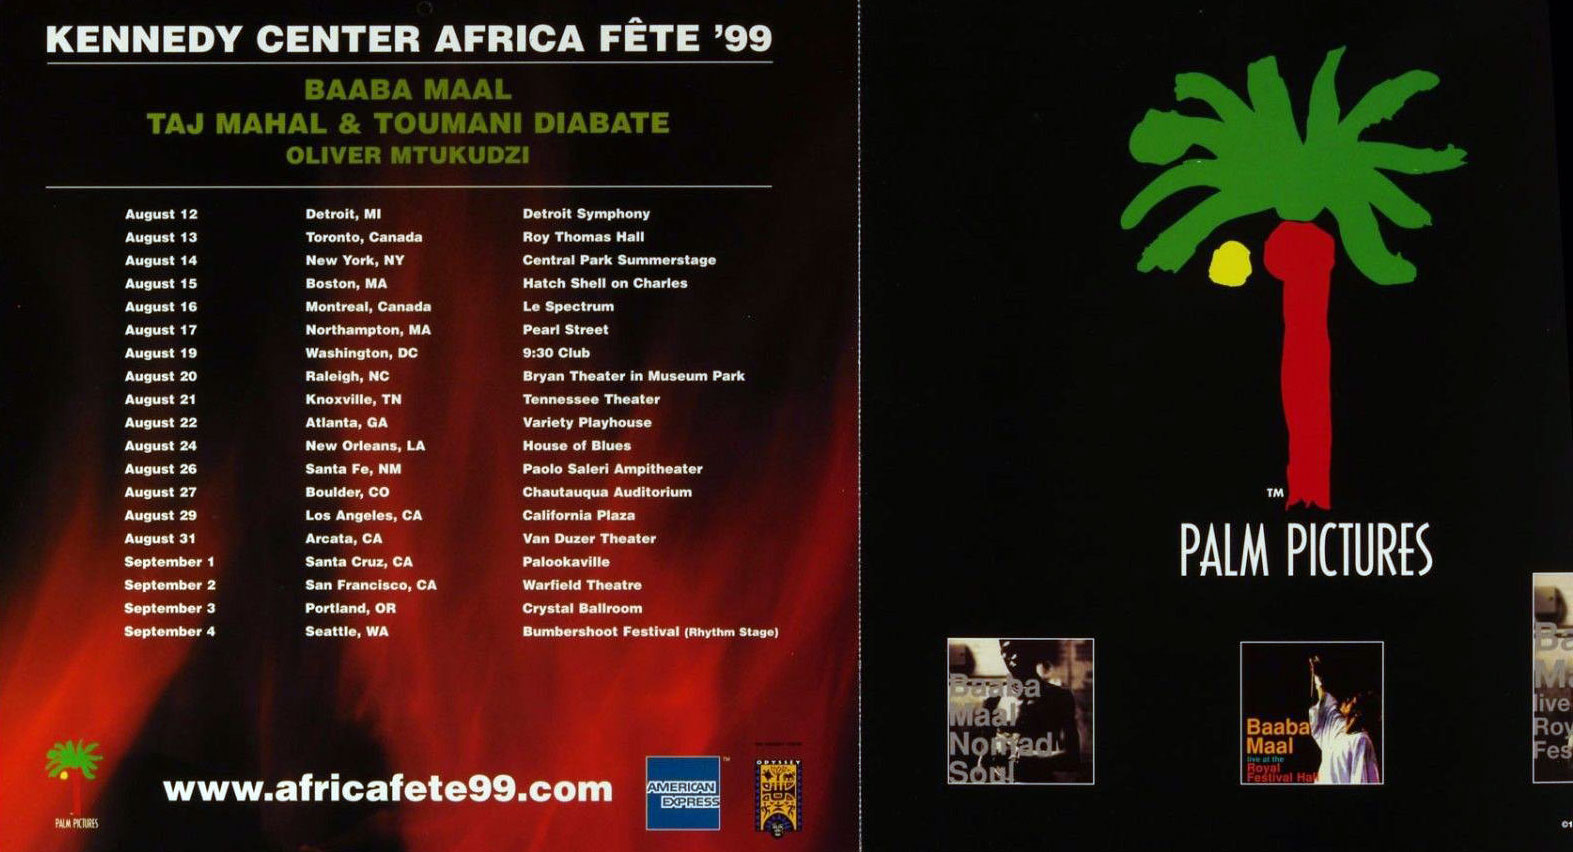 Africa Fete 99 Poster Flat 1999 New CD Album Promotion 12 x 12